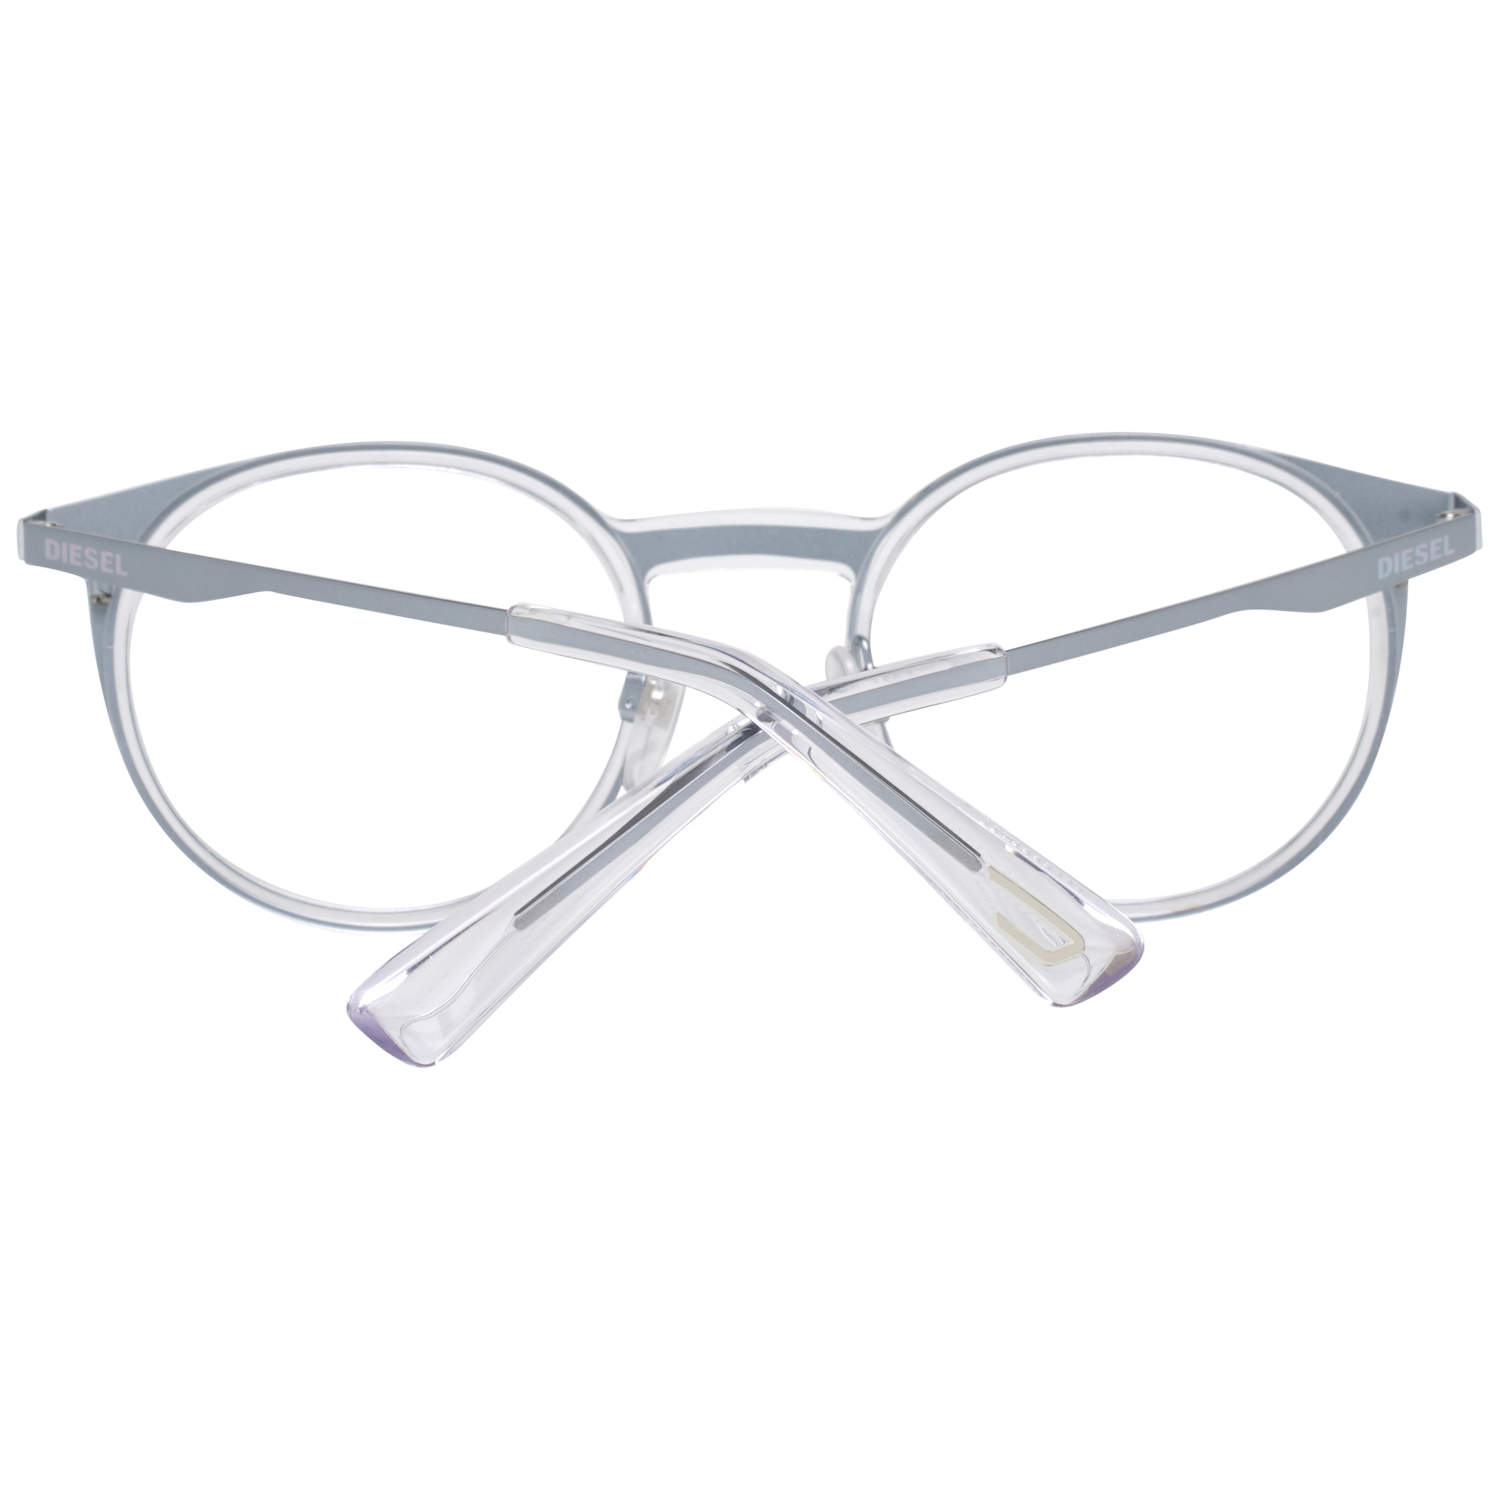 GenderUnisexMain colorGreyFrame colorGreyFrame materialMetal & PlasticSize49-22-145Lenses width49mmLenses heigth42mmBridge length22mmFrame width136mmTemple length145mmShipment includesCase, Cleaning clothStyleFull-RimSpring hingeNo